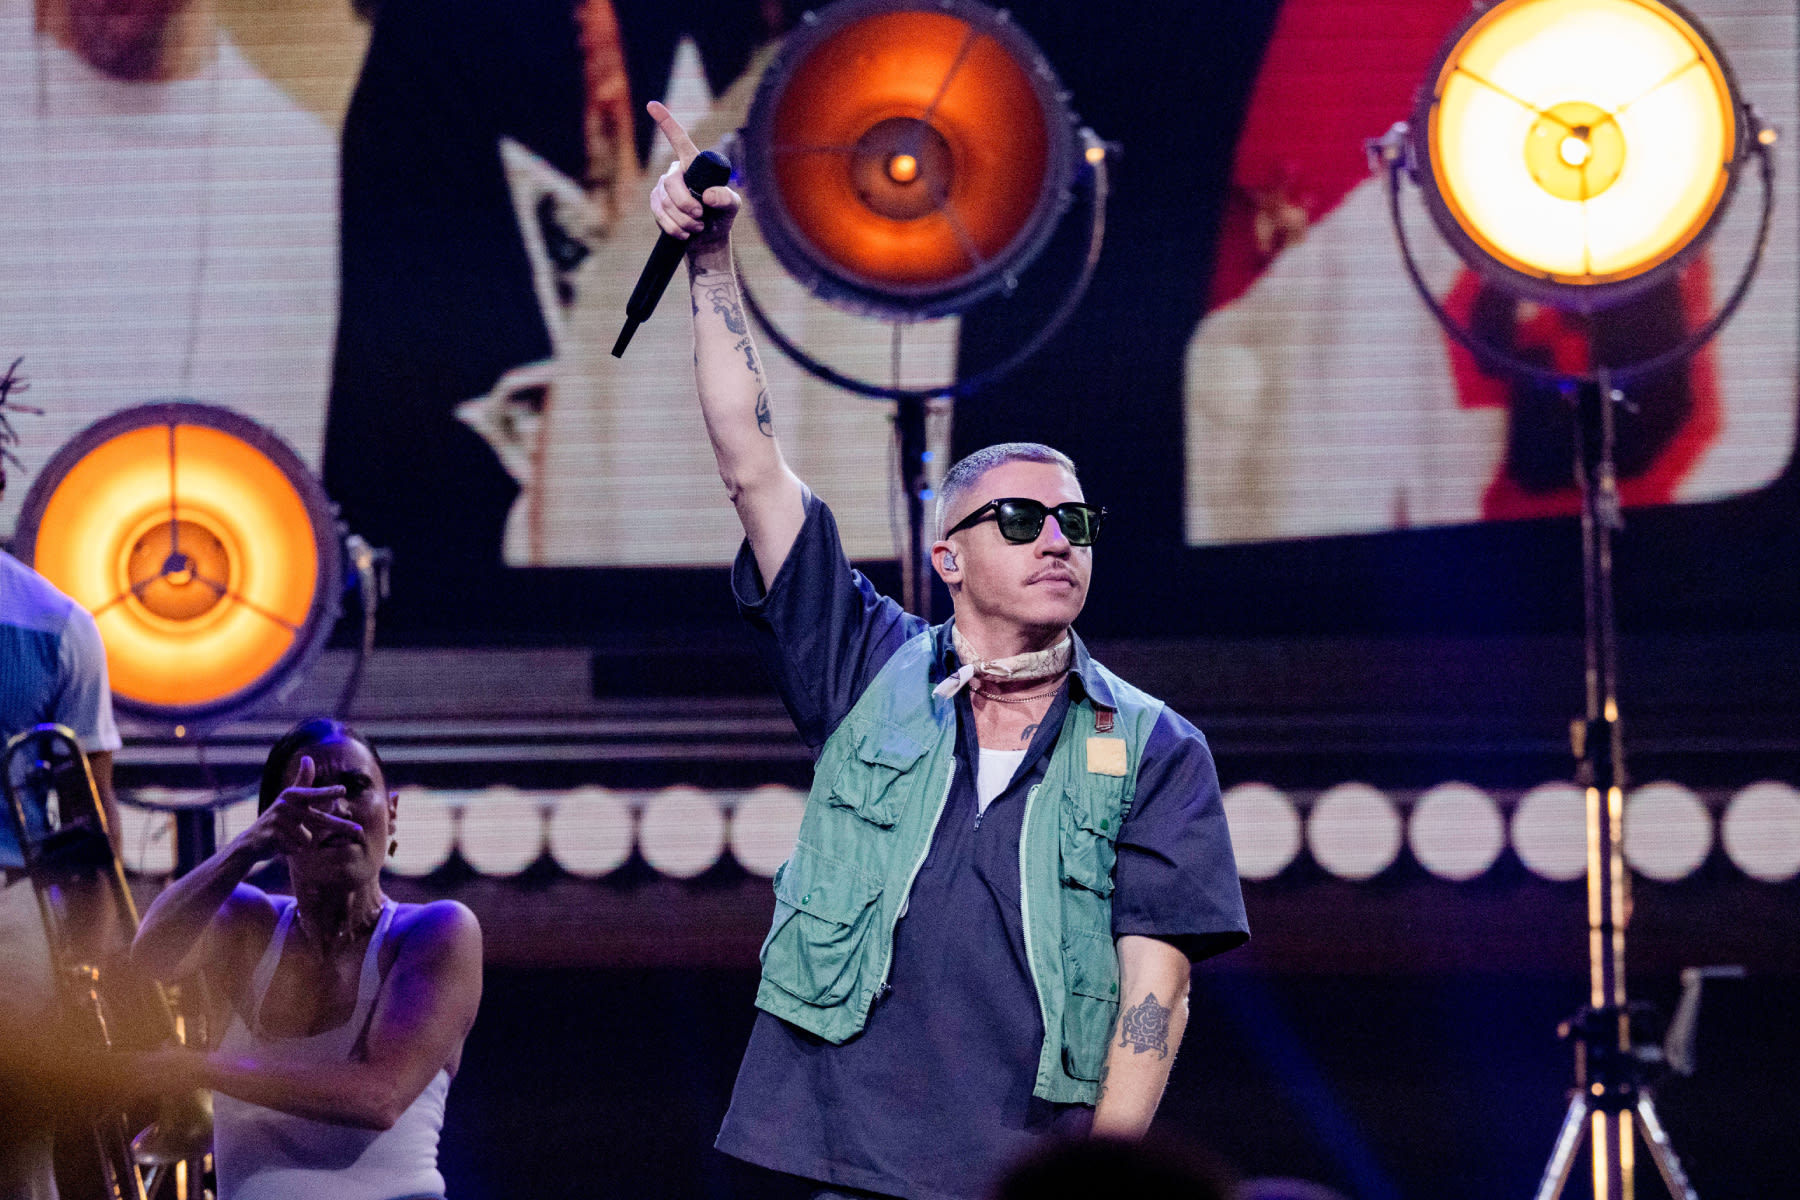 Macklemore Drops ‘Hind’s Hall’ in Support of Pro-Palestine Protesters, Gaza Ceasefire